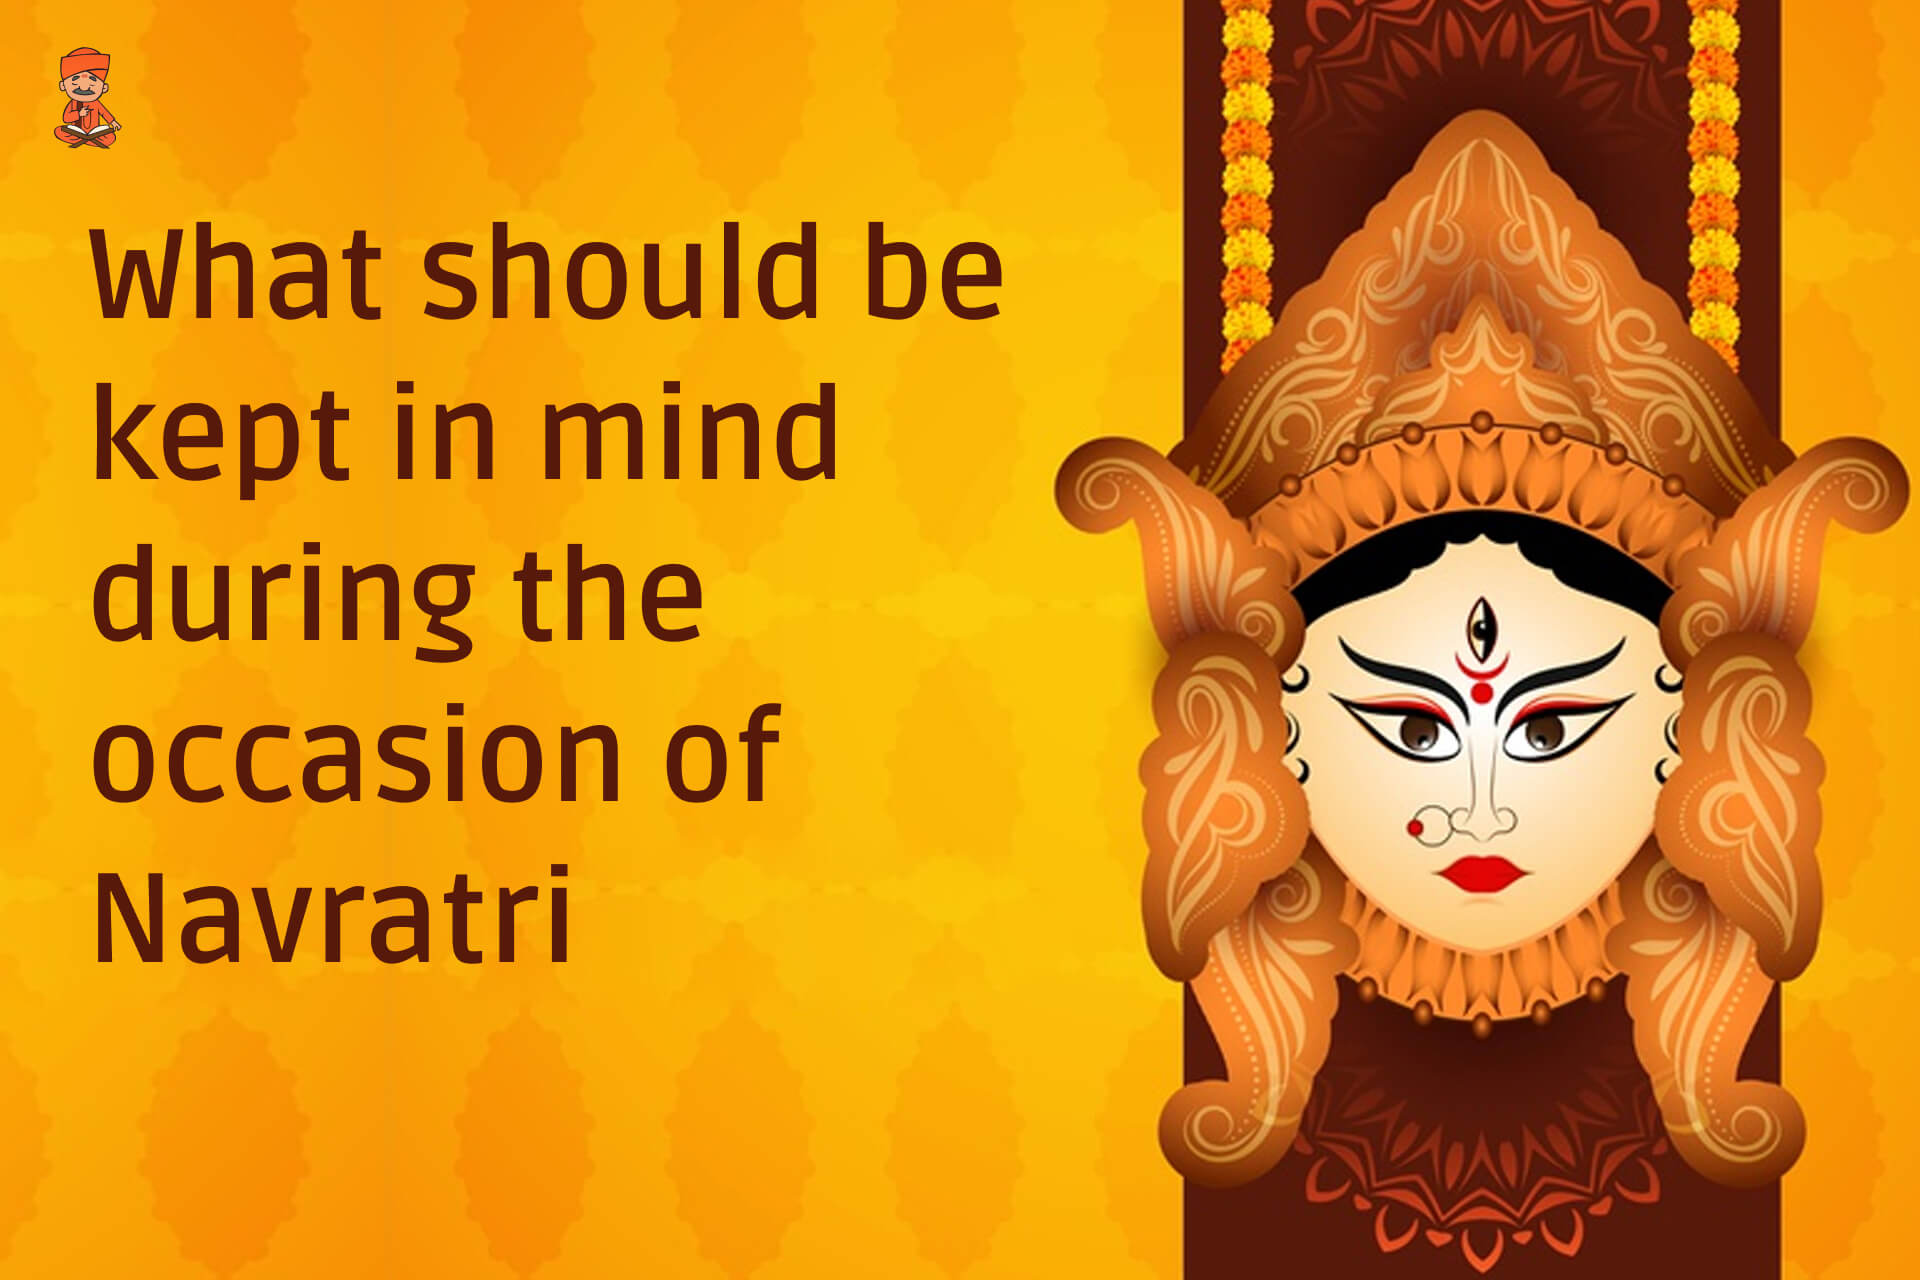 What Should be Kept in Mind During the Occasion of Navratri